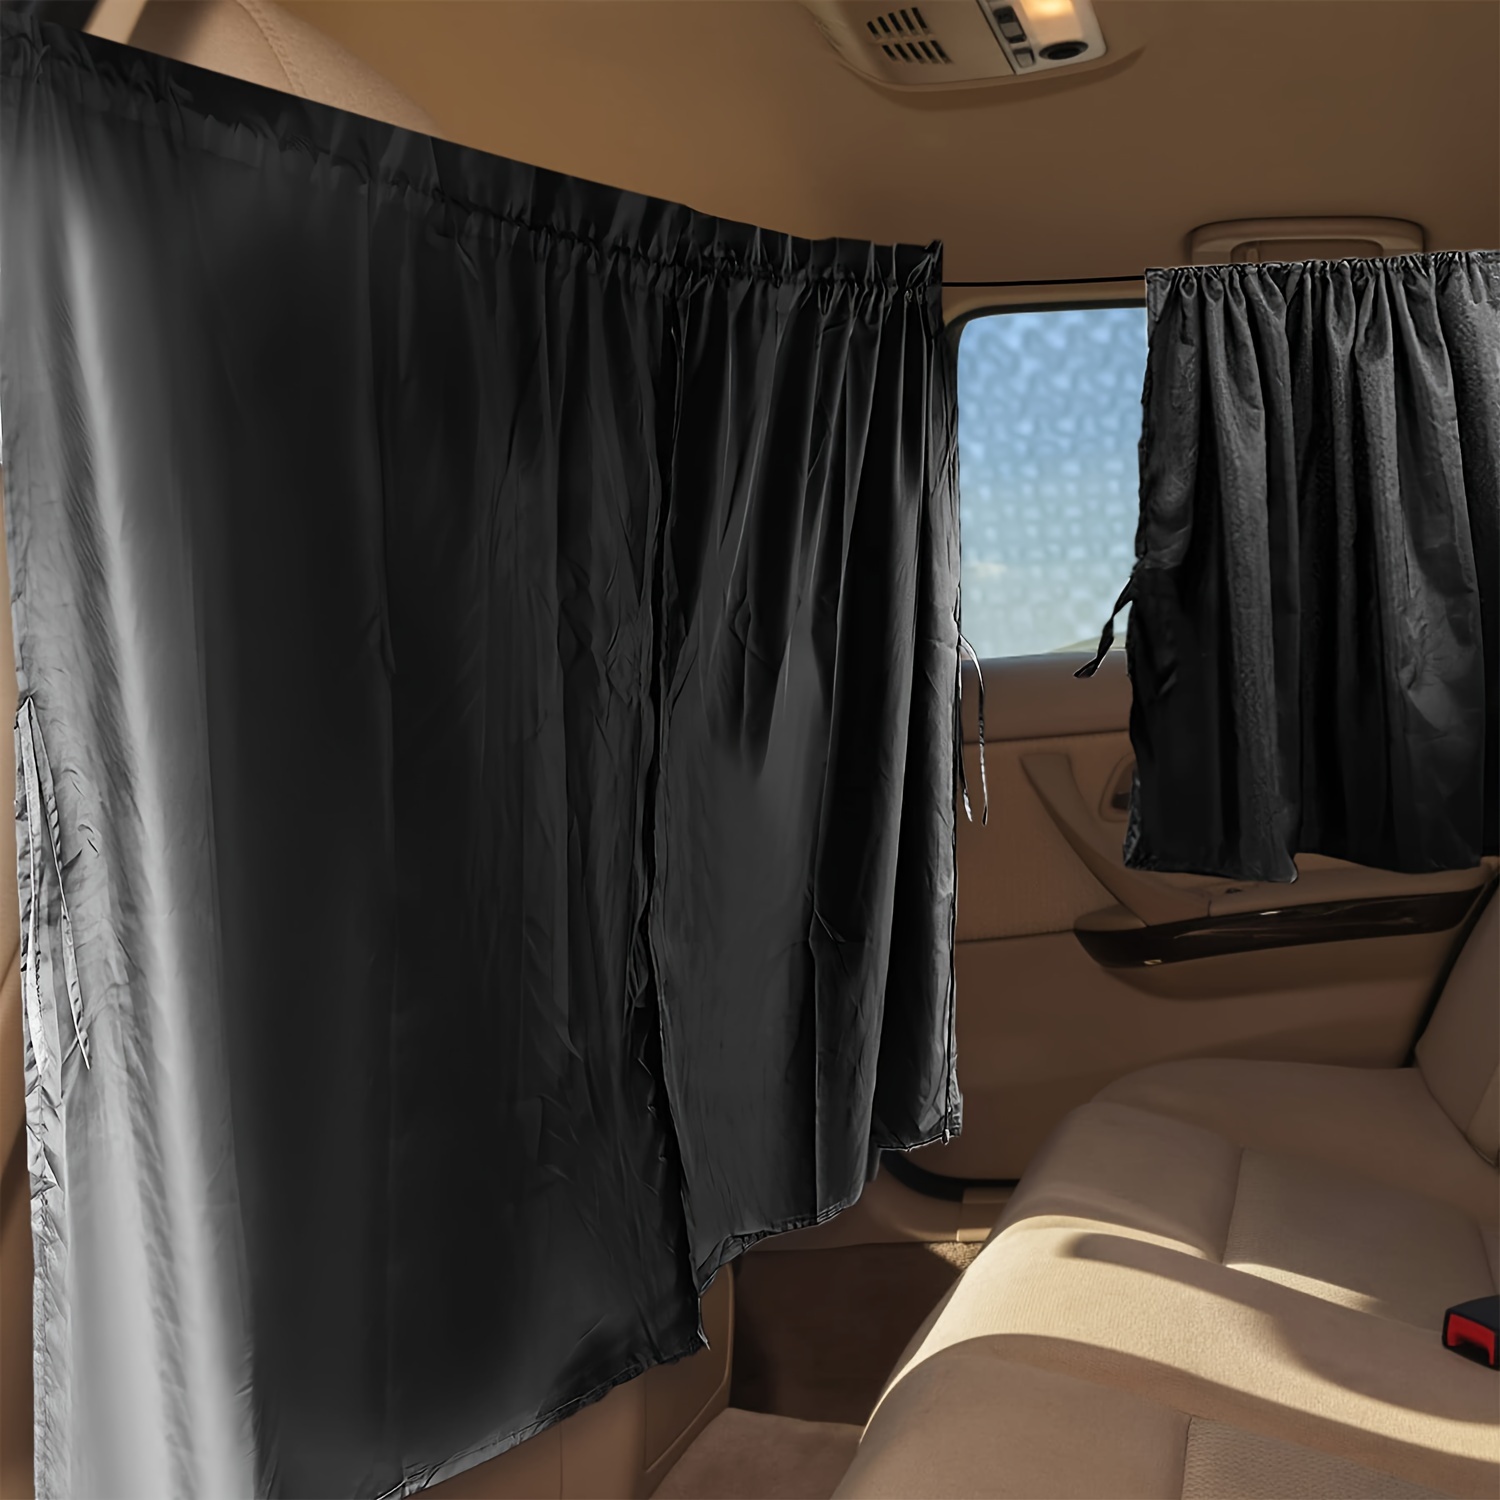 

3pcs/set Car Privacy Curtains, Used For Sleeping In The Car While Camping In An Suv Or Van, Including 1 Rear Seat Partition Curtain And 2 Side Window Partition Curtains.